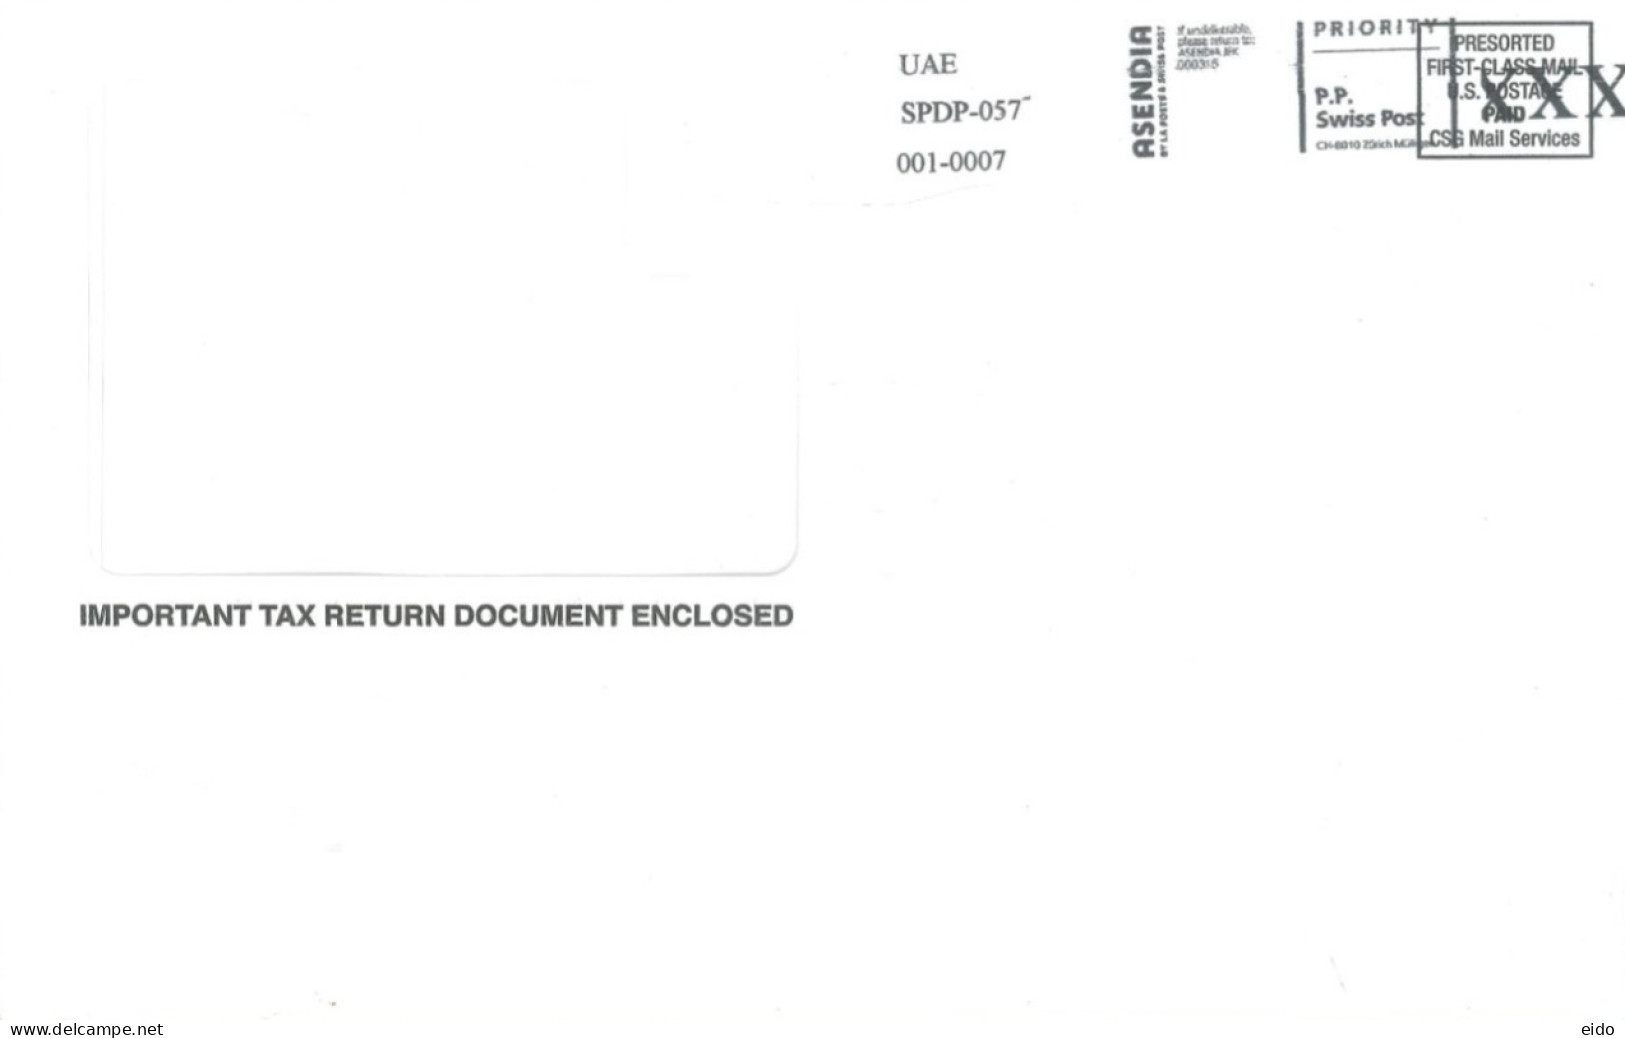 SWITZERLAND - 2023, PRIORITY POSTAGE PAID FRANKING MACHINE COVER TO DUBAI. - Covers & Documents